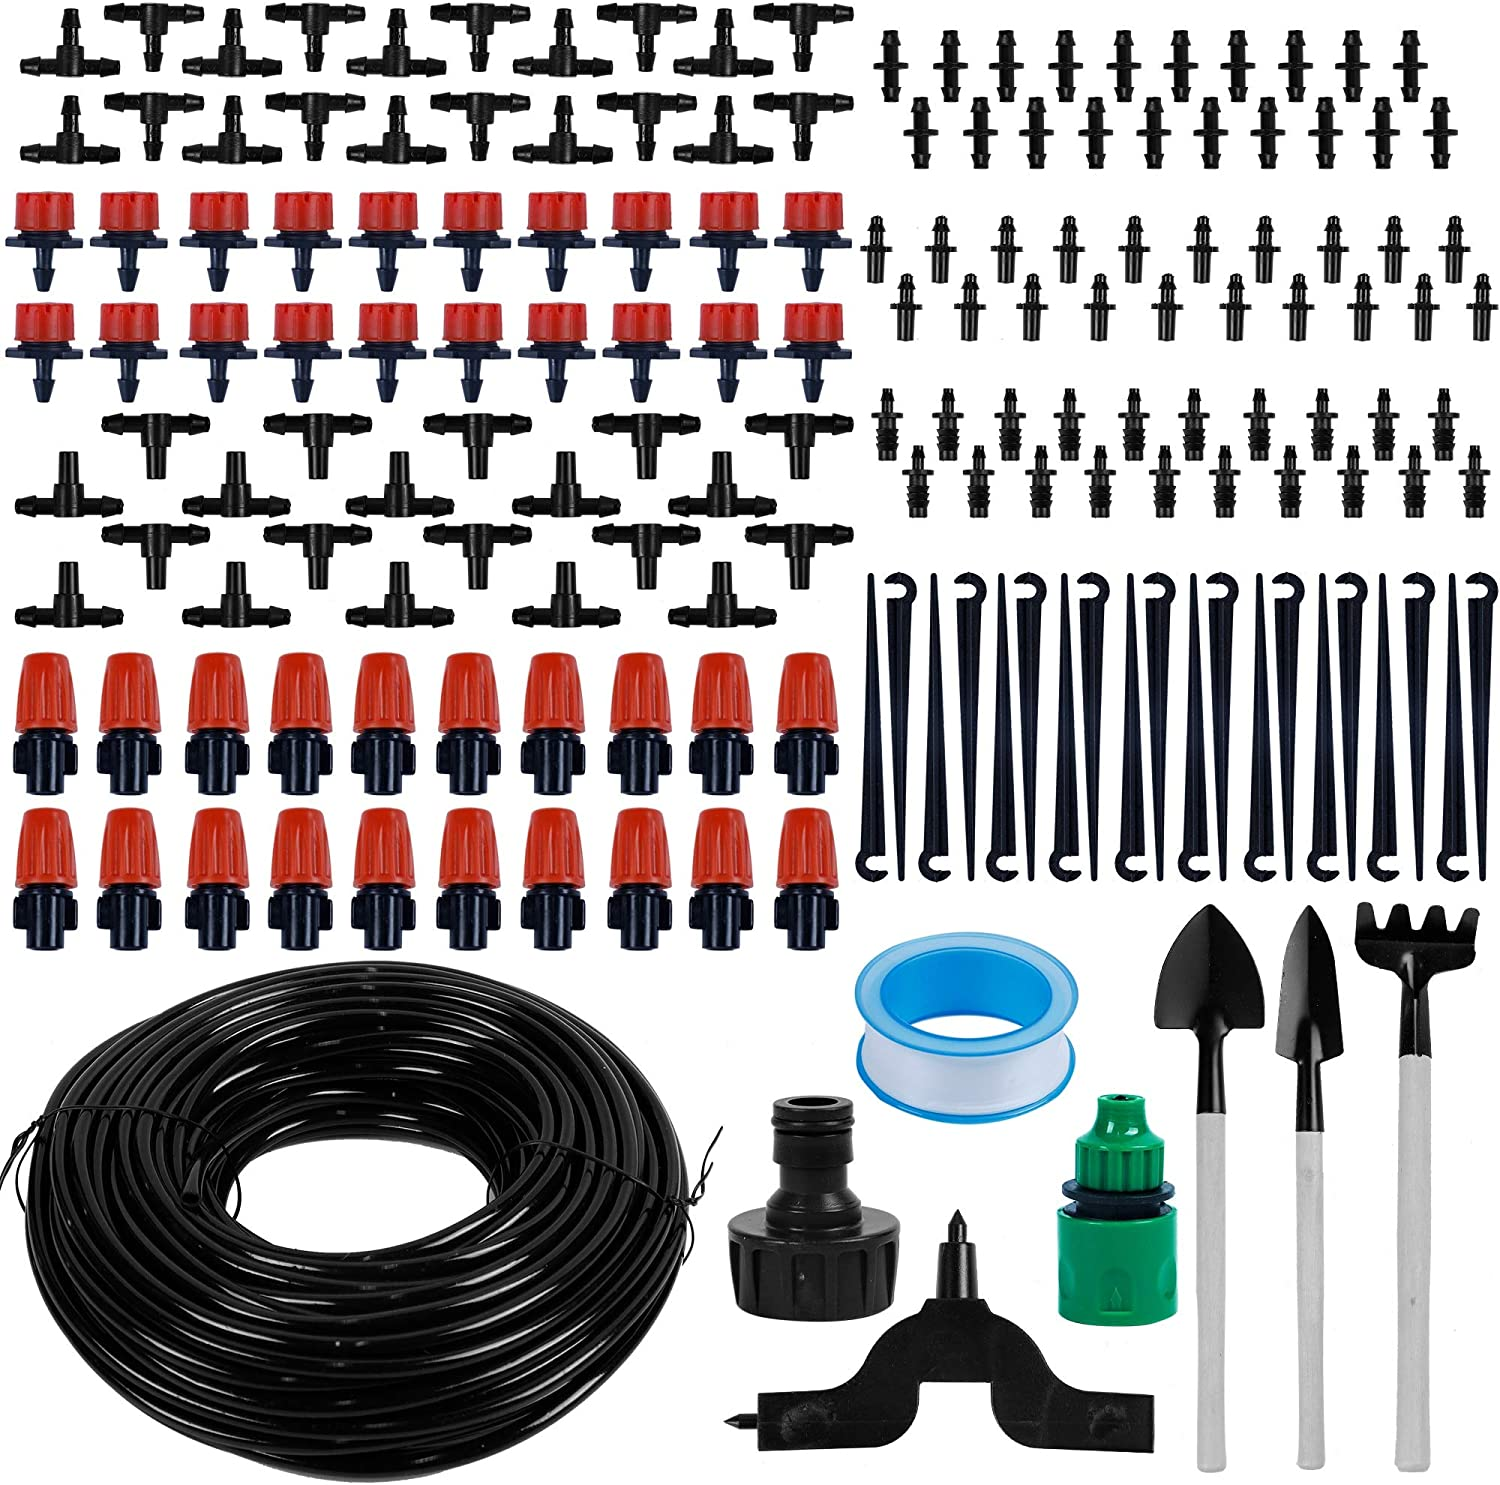 168PCS 50Ft Garden Irrigation System, 1/4" Blank Distribution Tubing Drip Irrigation Hose For, save Water, Adjustable Automatic Irrigation Equipment for Garden